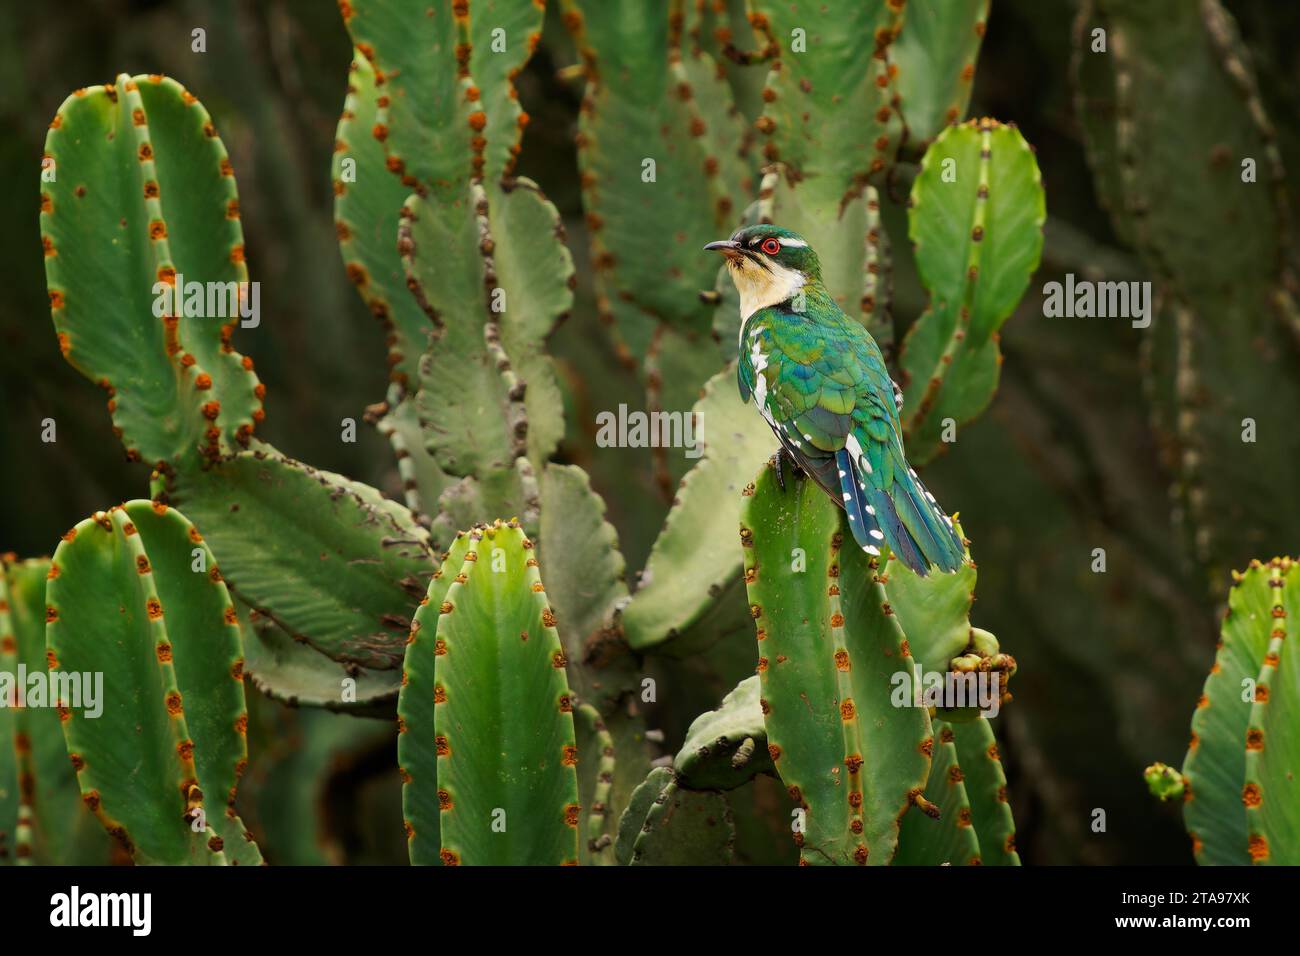 Diederik cuckoo - Chrysococcyx caprius, formerly dideric or didric cuckoo, bird in the Cuculiformes, glossy green small bird on the green cactus in af Stock Photo